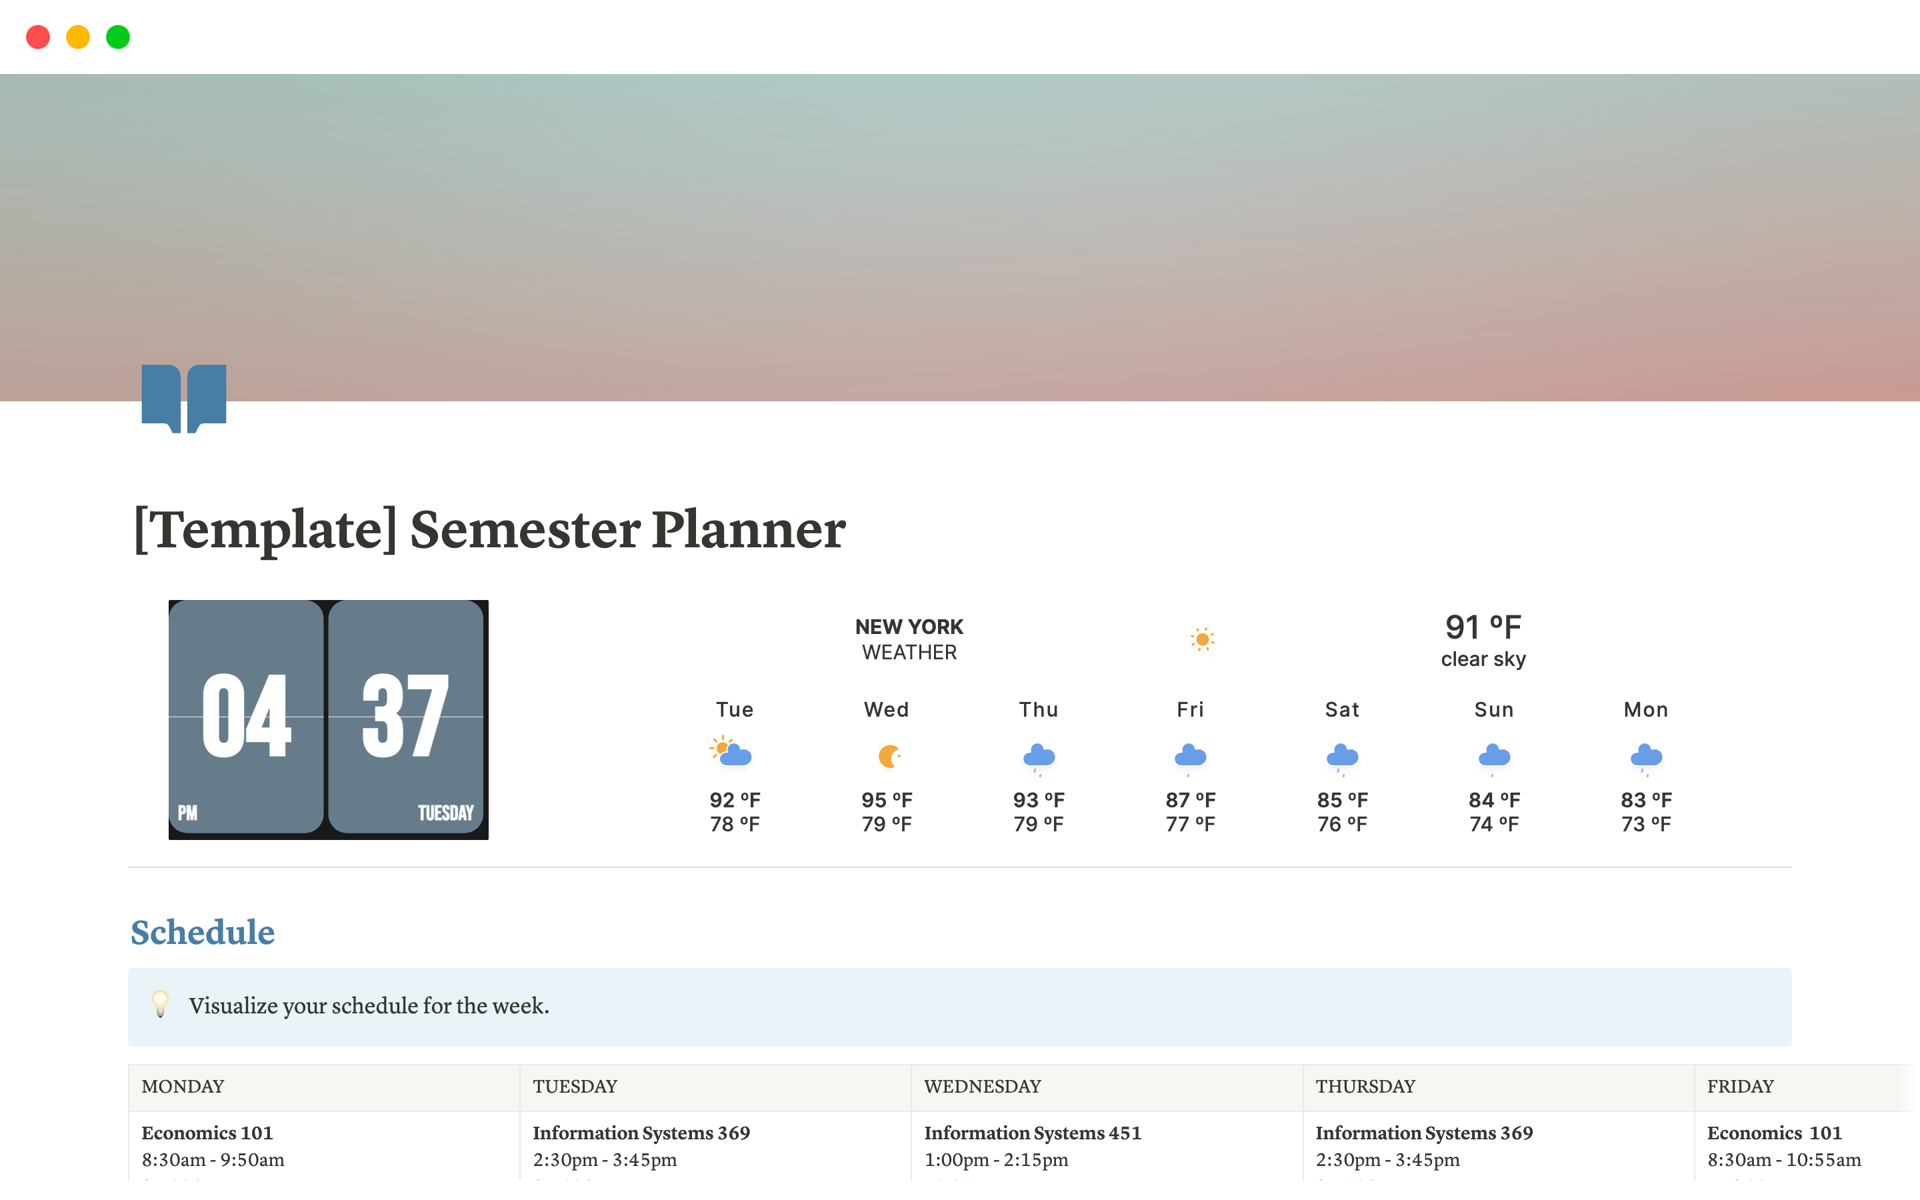 Plan your courses for the semester.